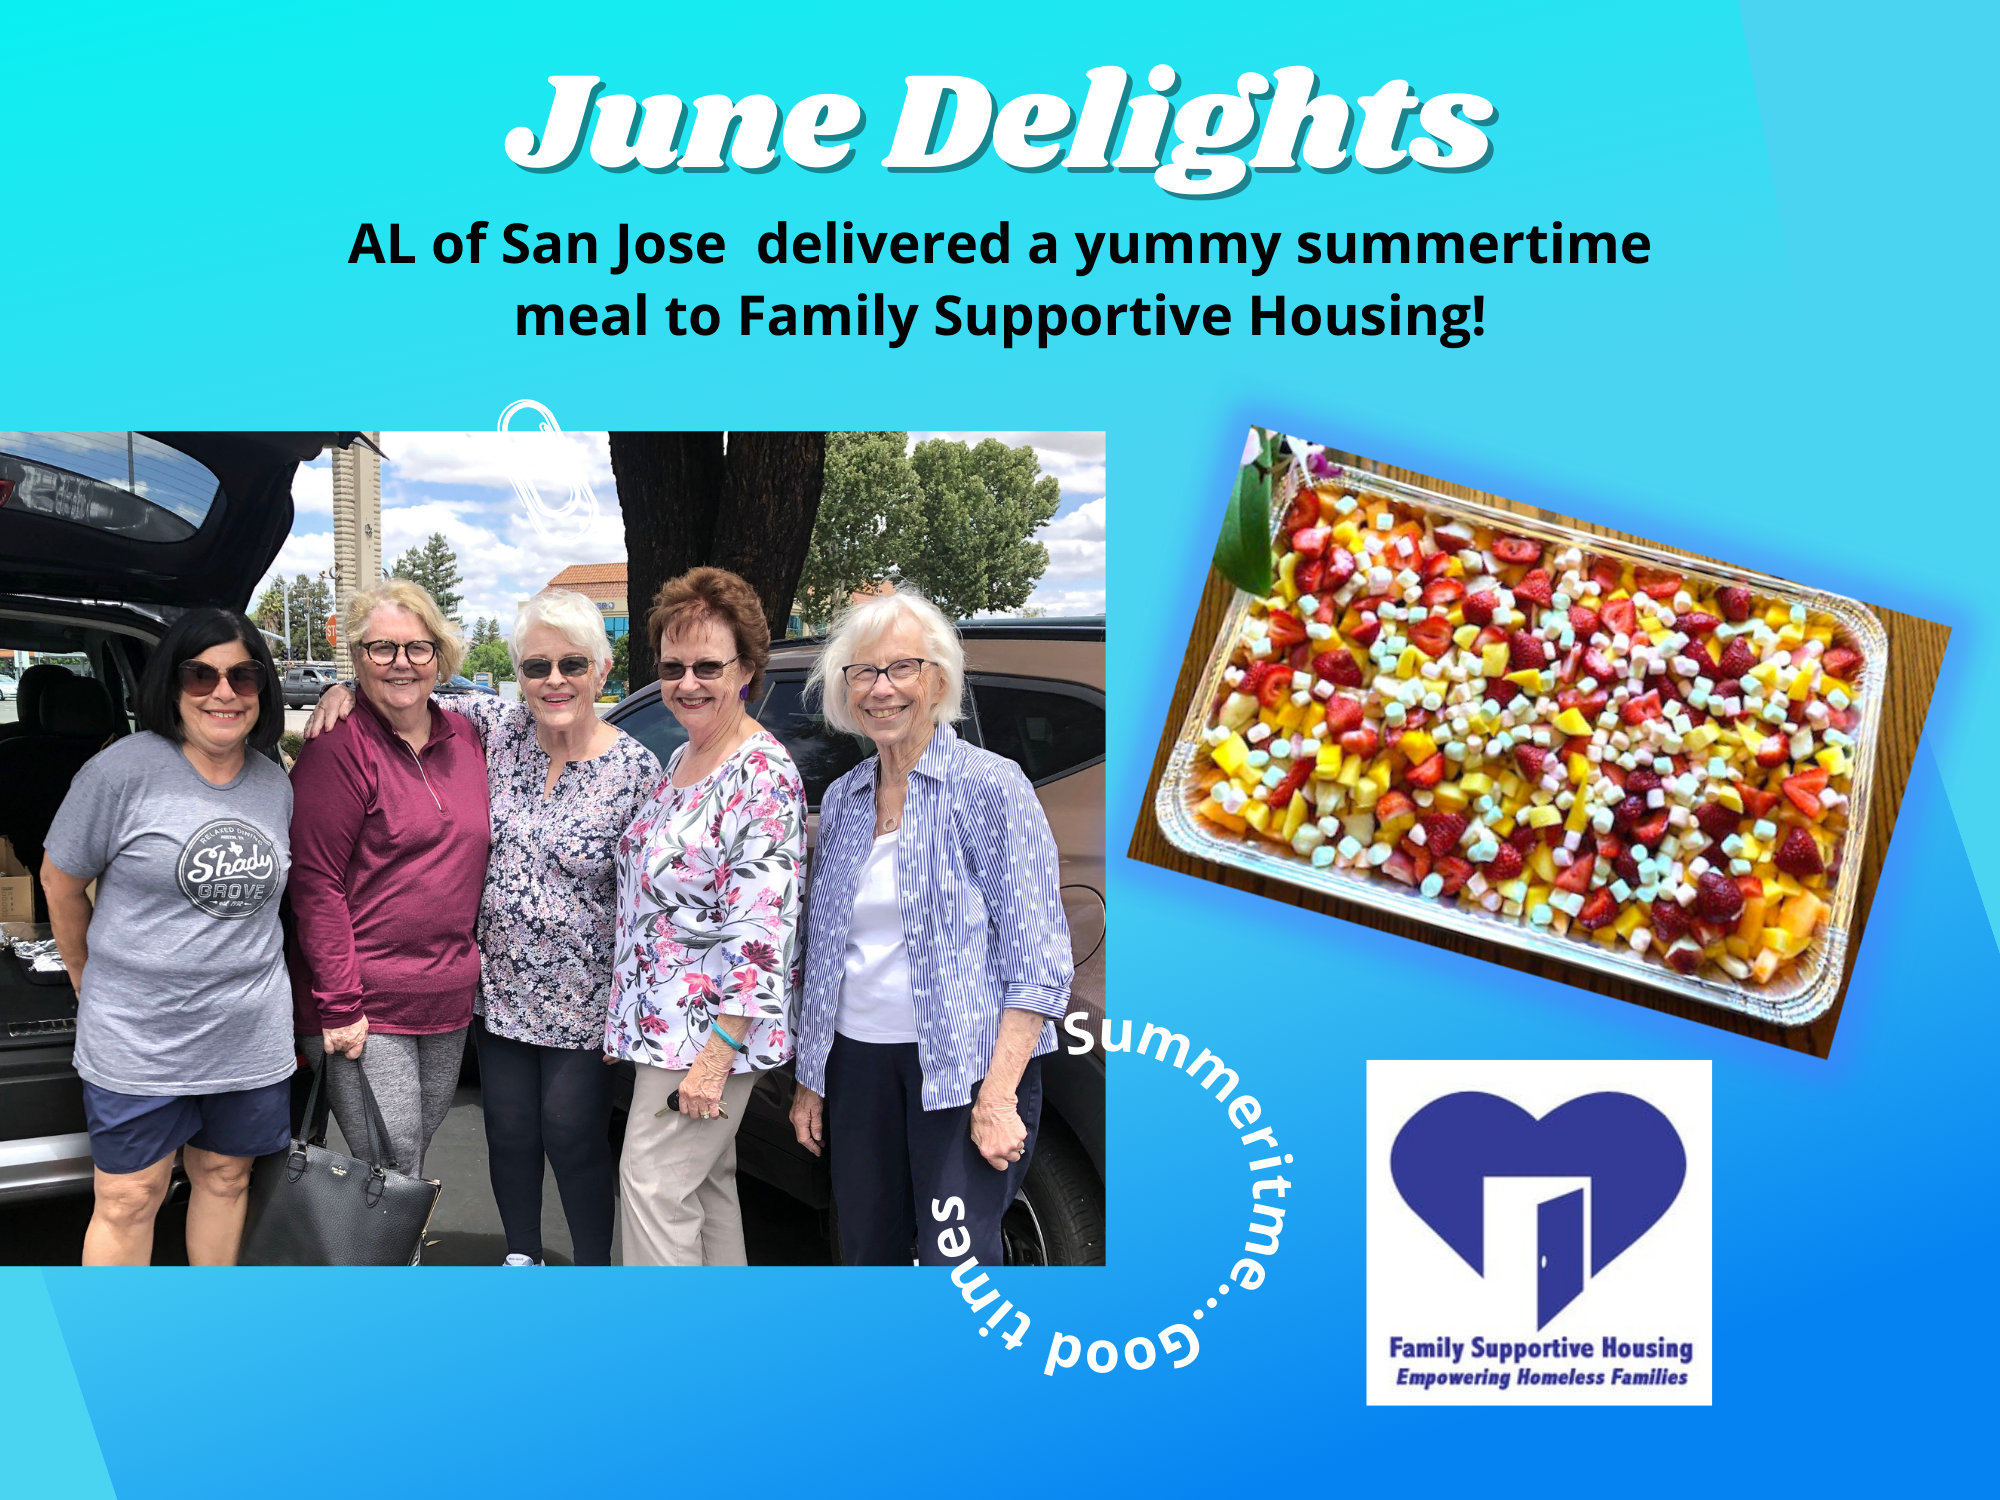 Summertime Meal Delivered to Family Supportive Housing